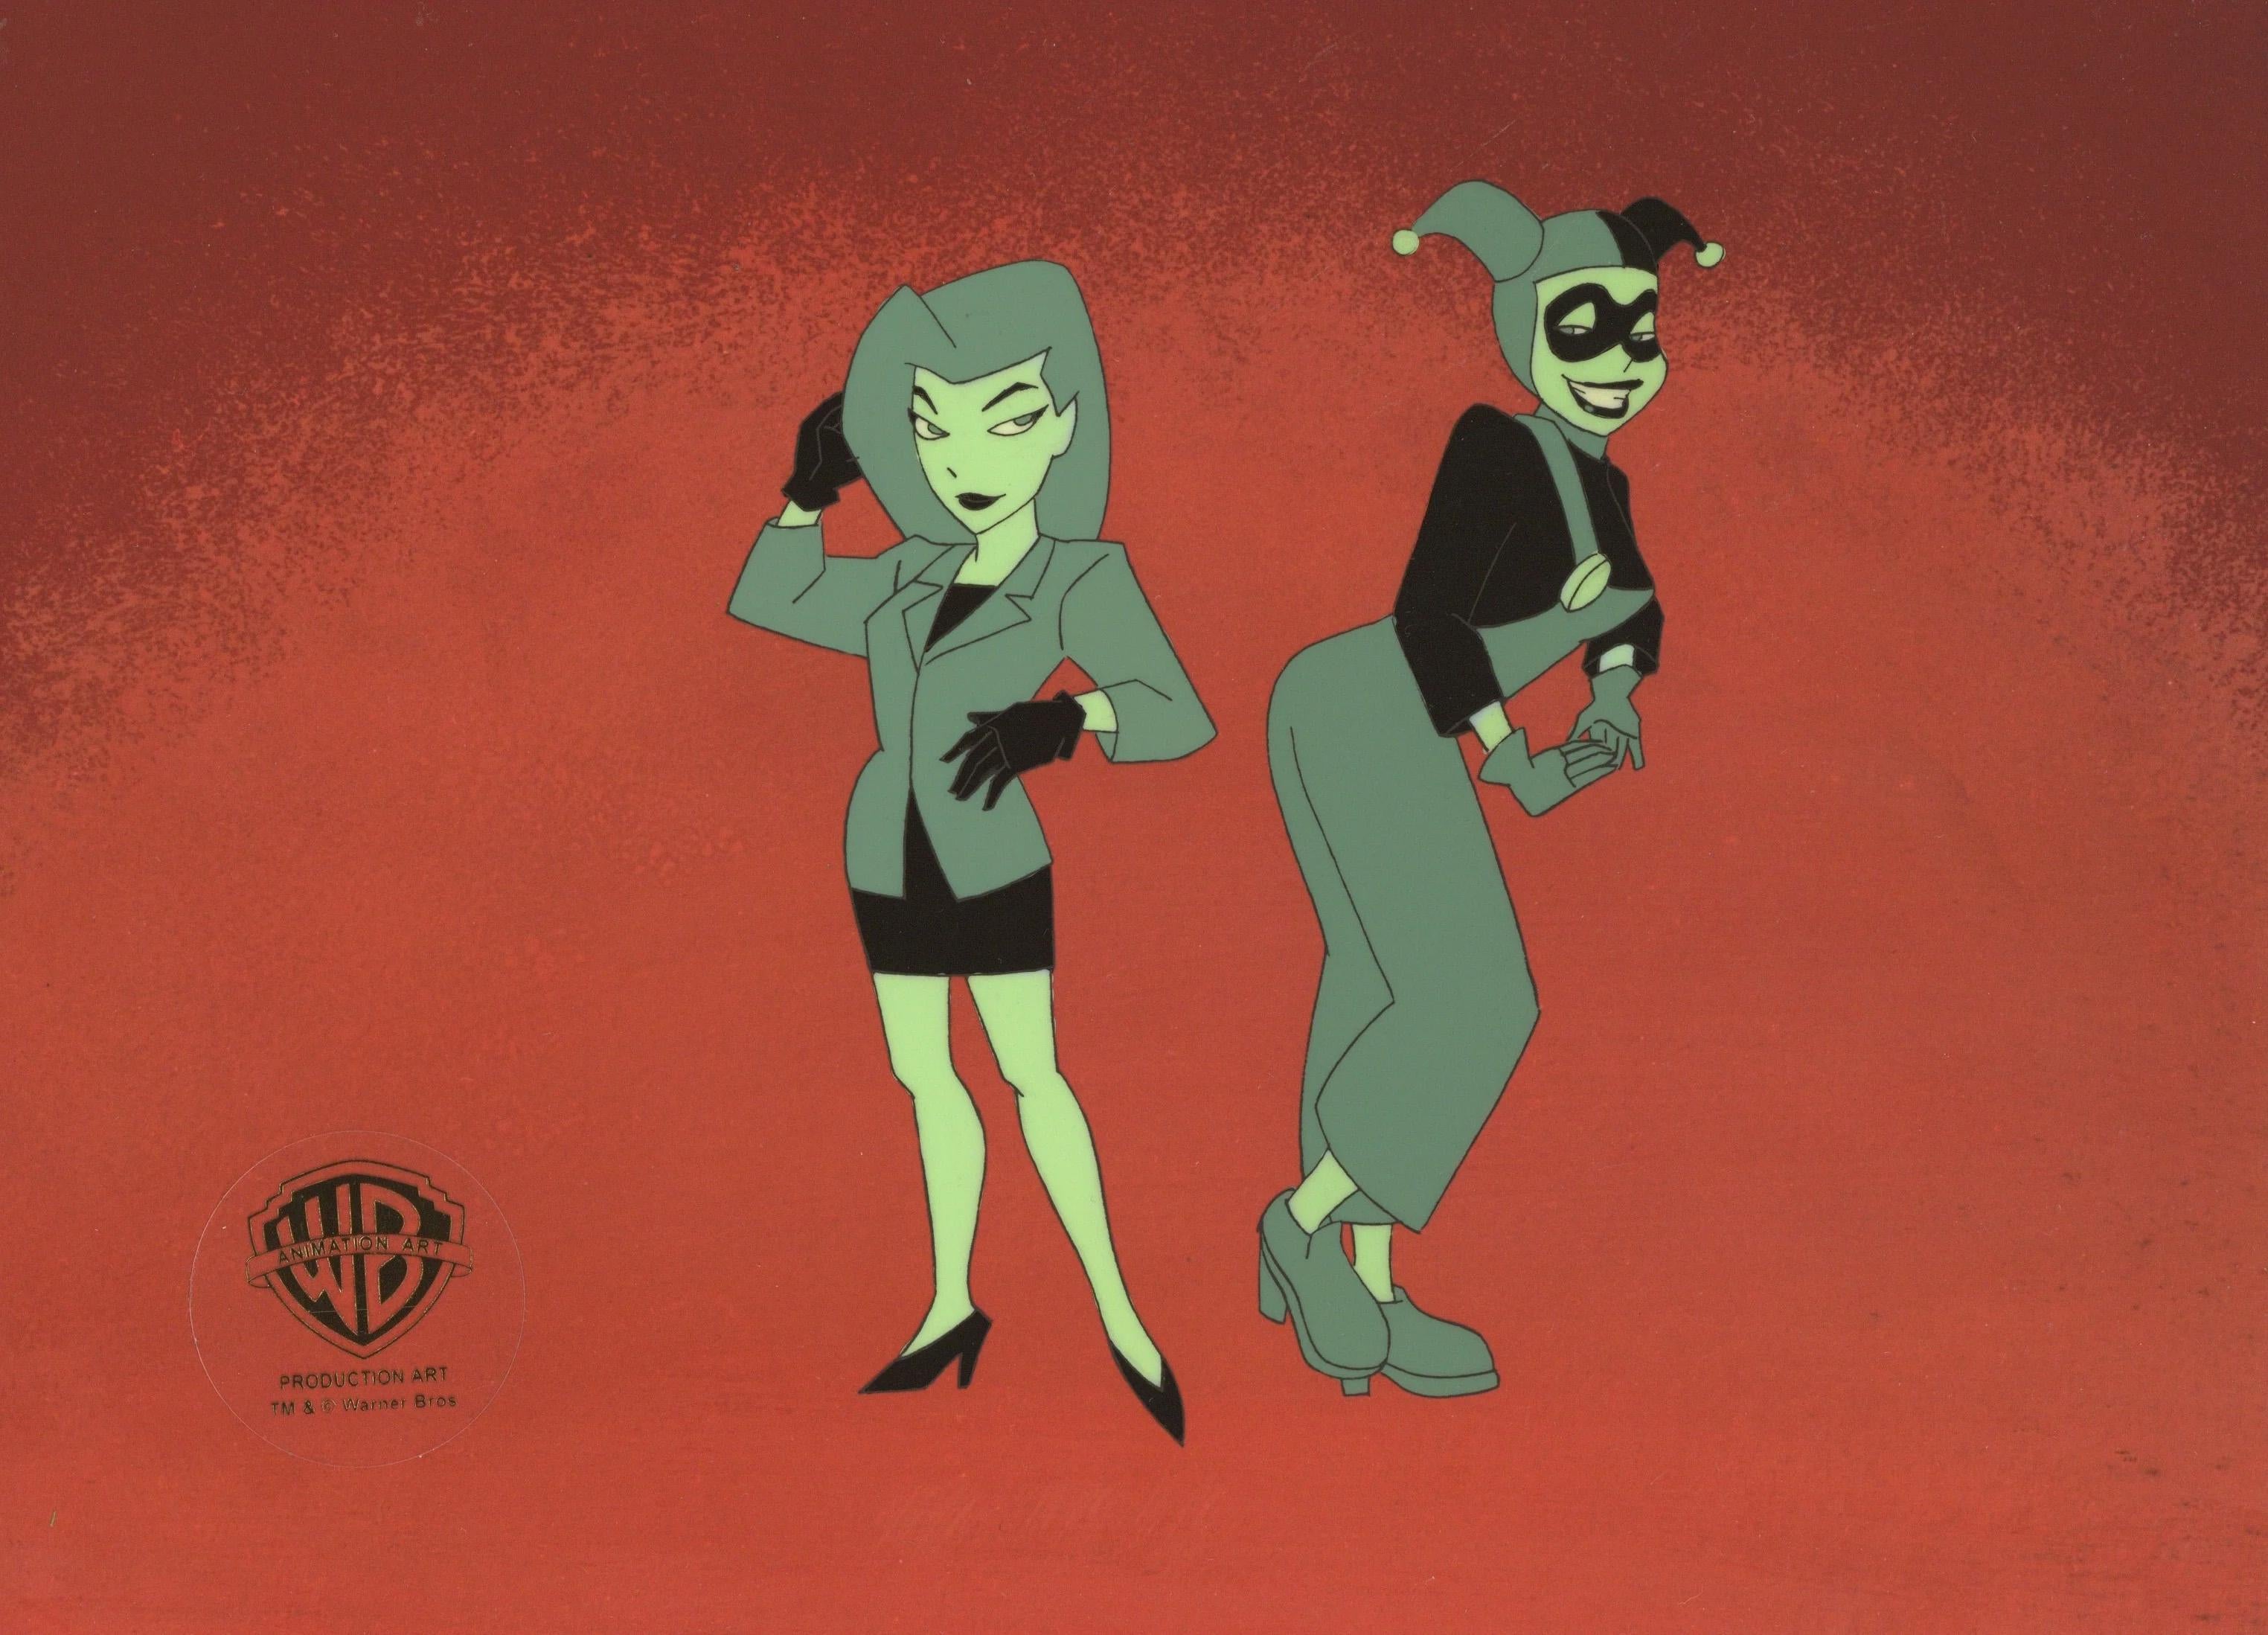 The New Batman Adventures Original Production Cel: Poison Ivy and Harley Quinn - Art by Warner Bros. Studio Artists